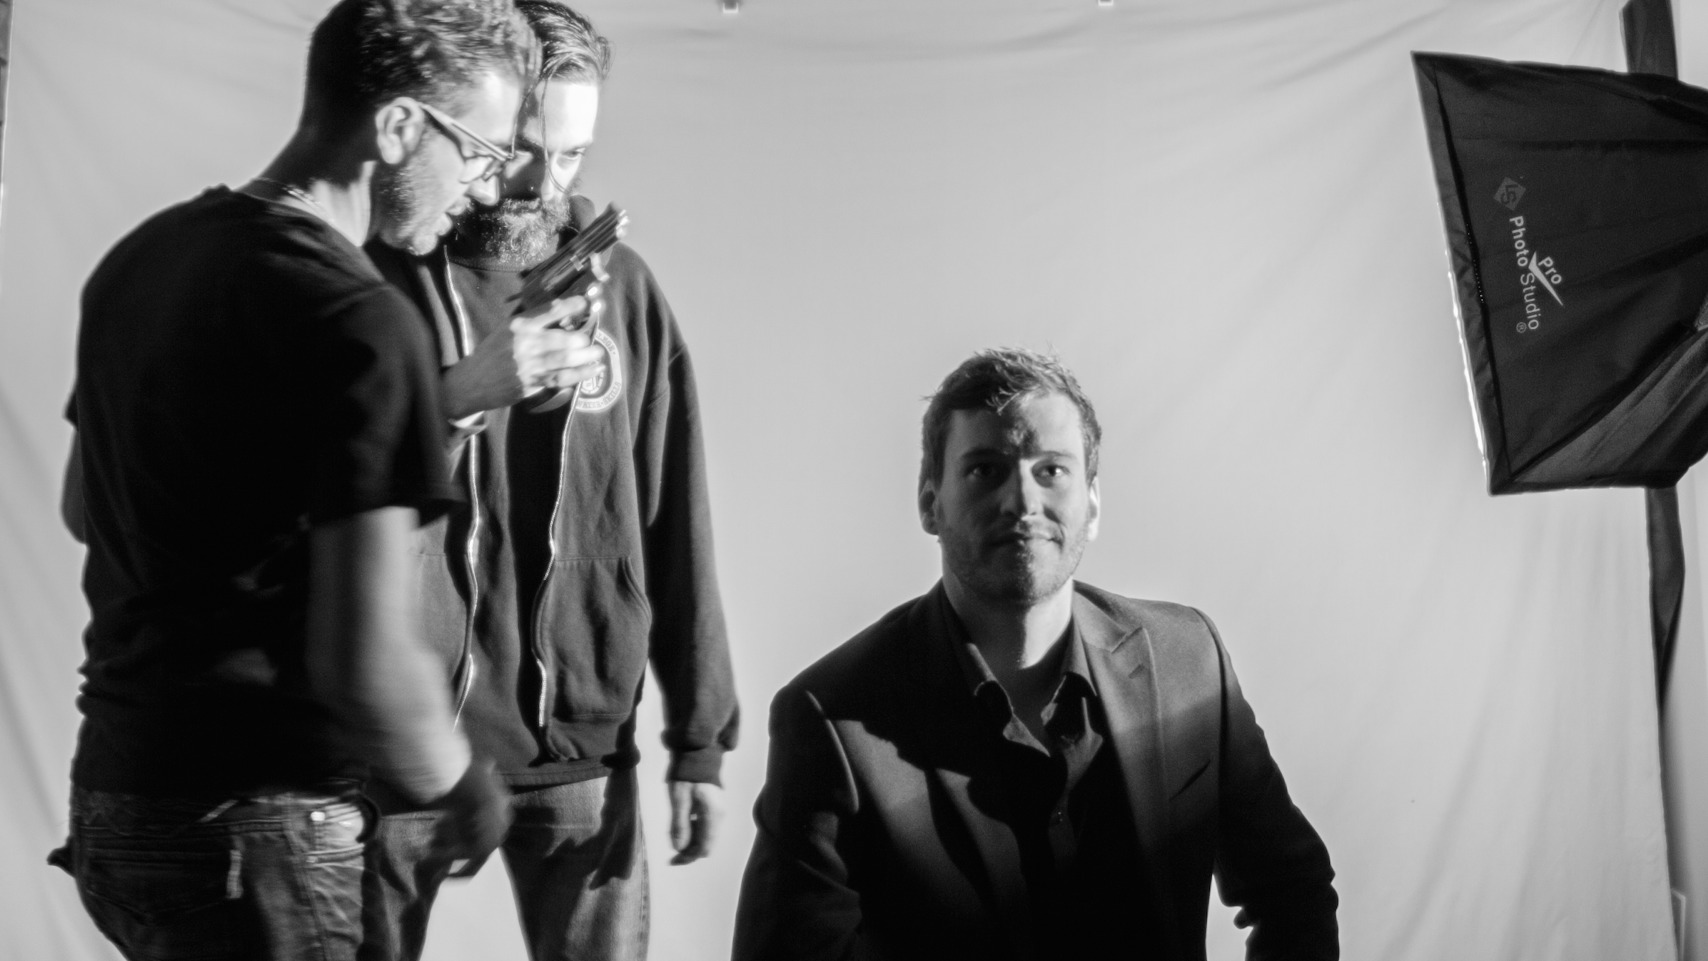 Photoshoot for 'The Architect of Downfall' film. With lead actors Jason Kettle and Chris Jarry.